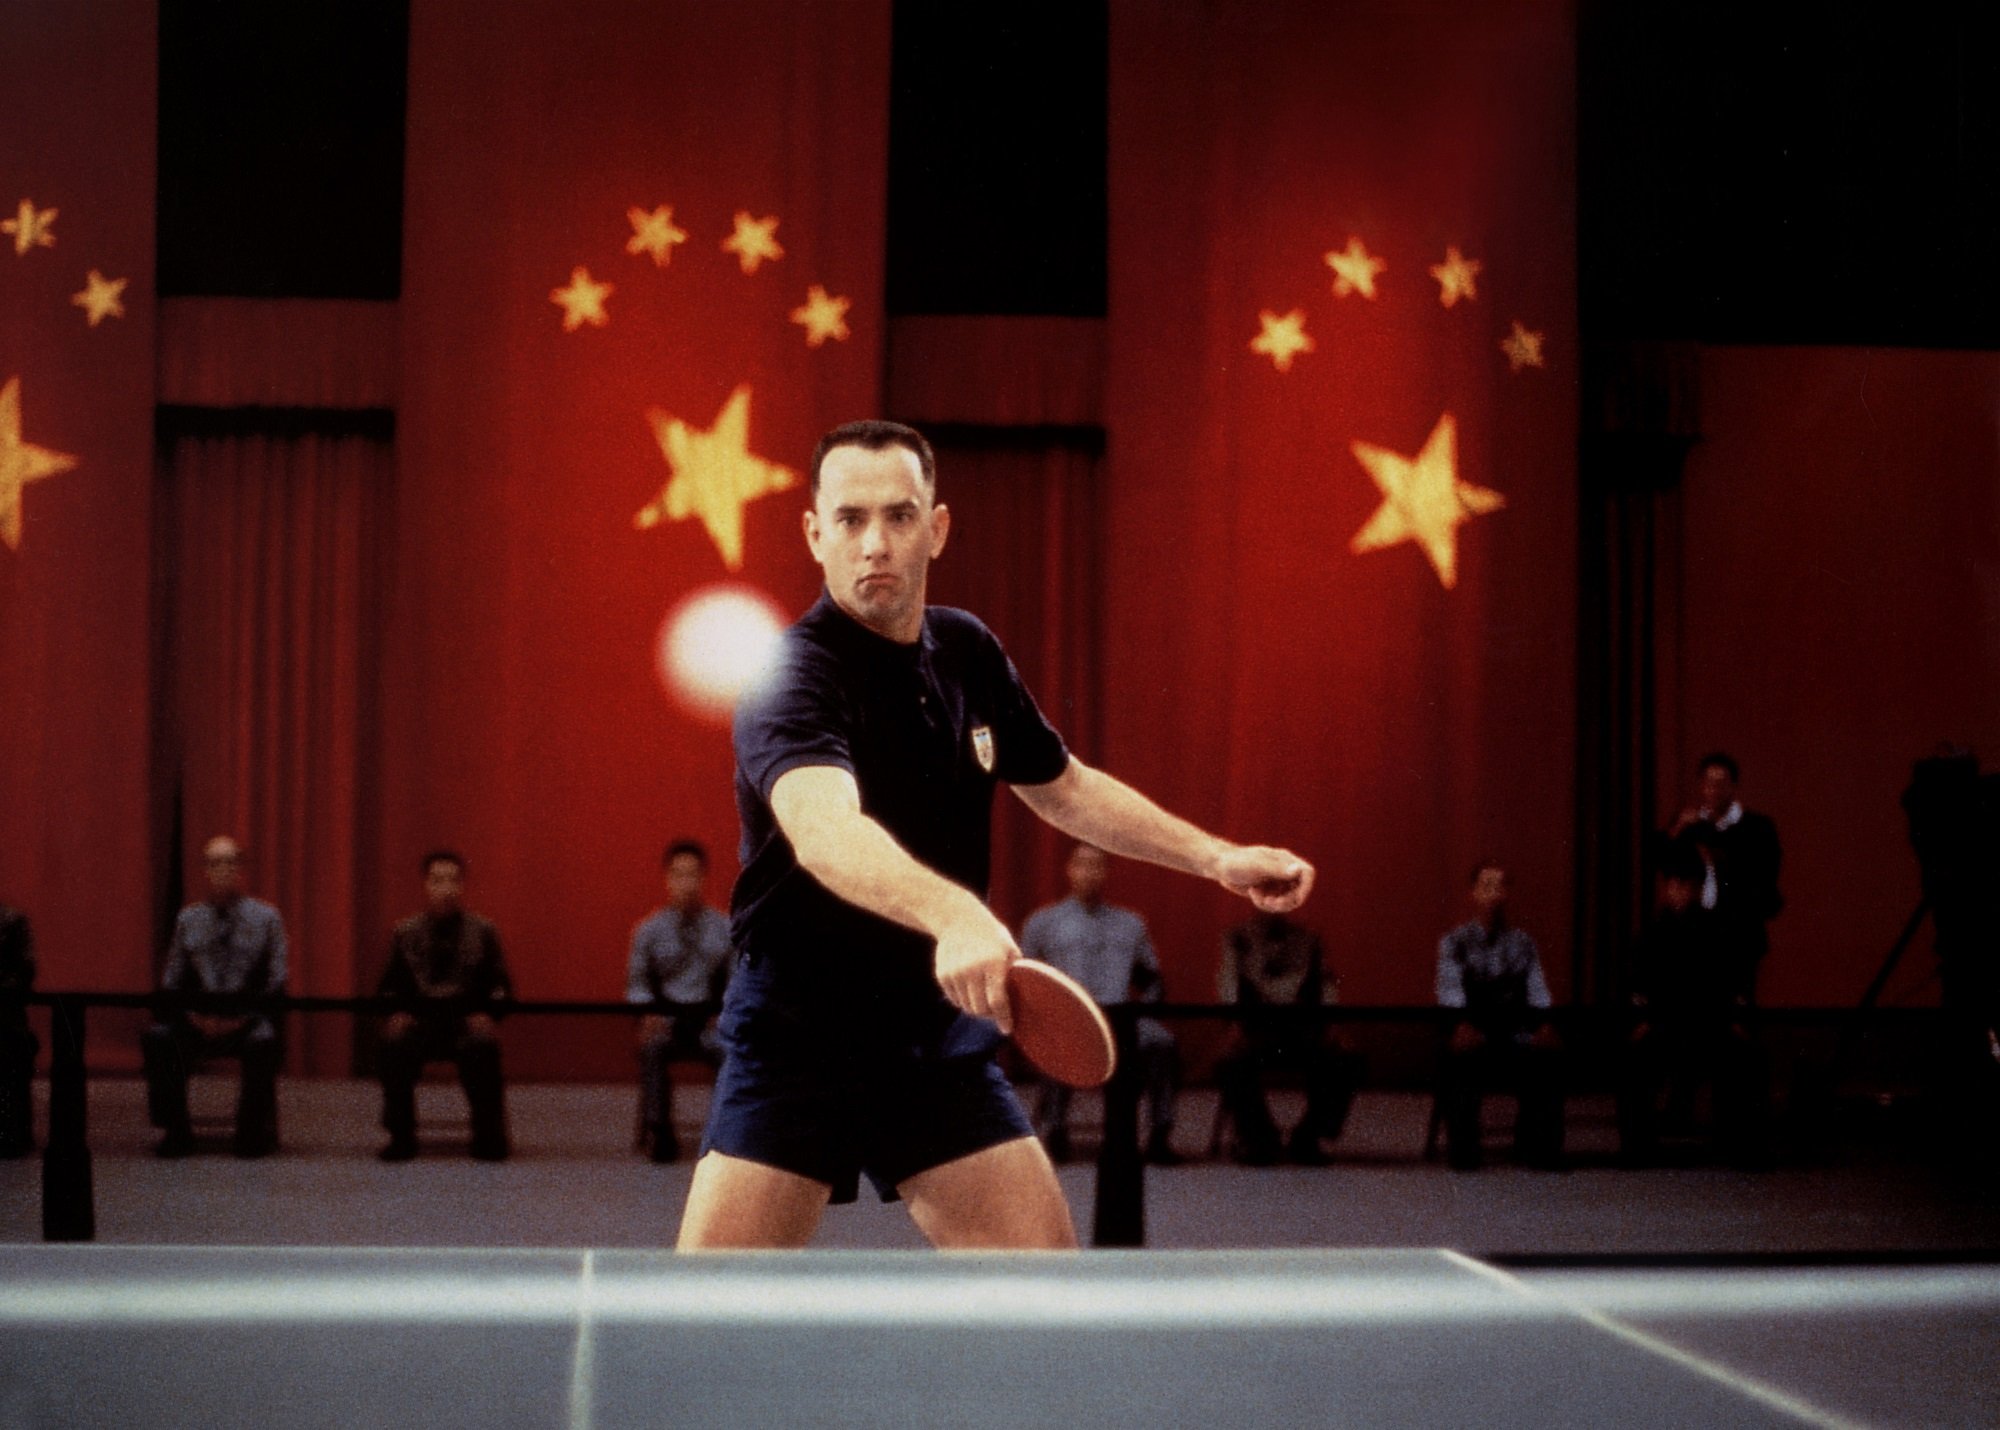 Forrest Gump playing table tennis